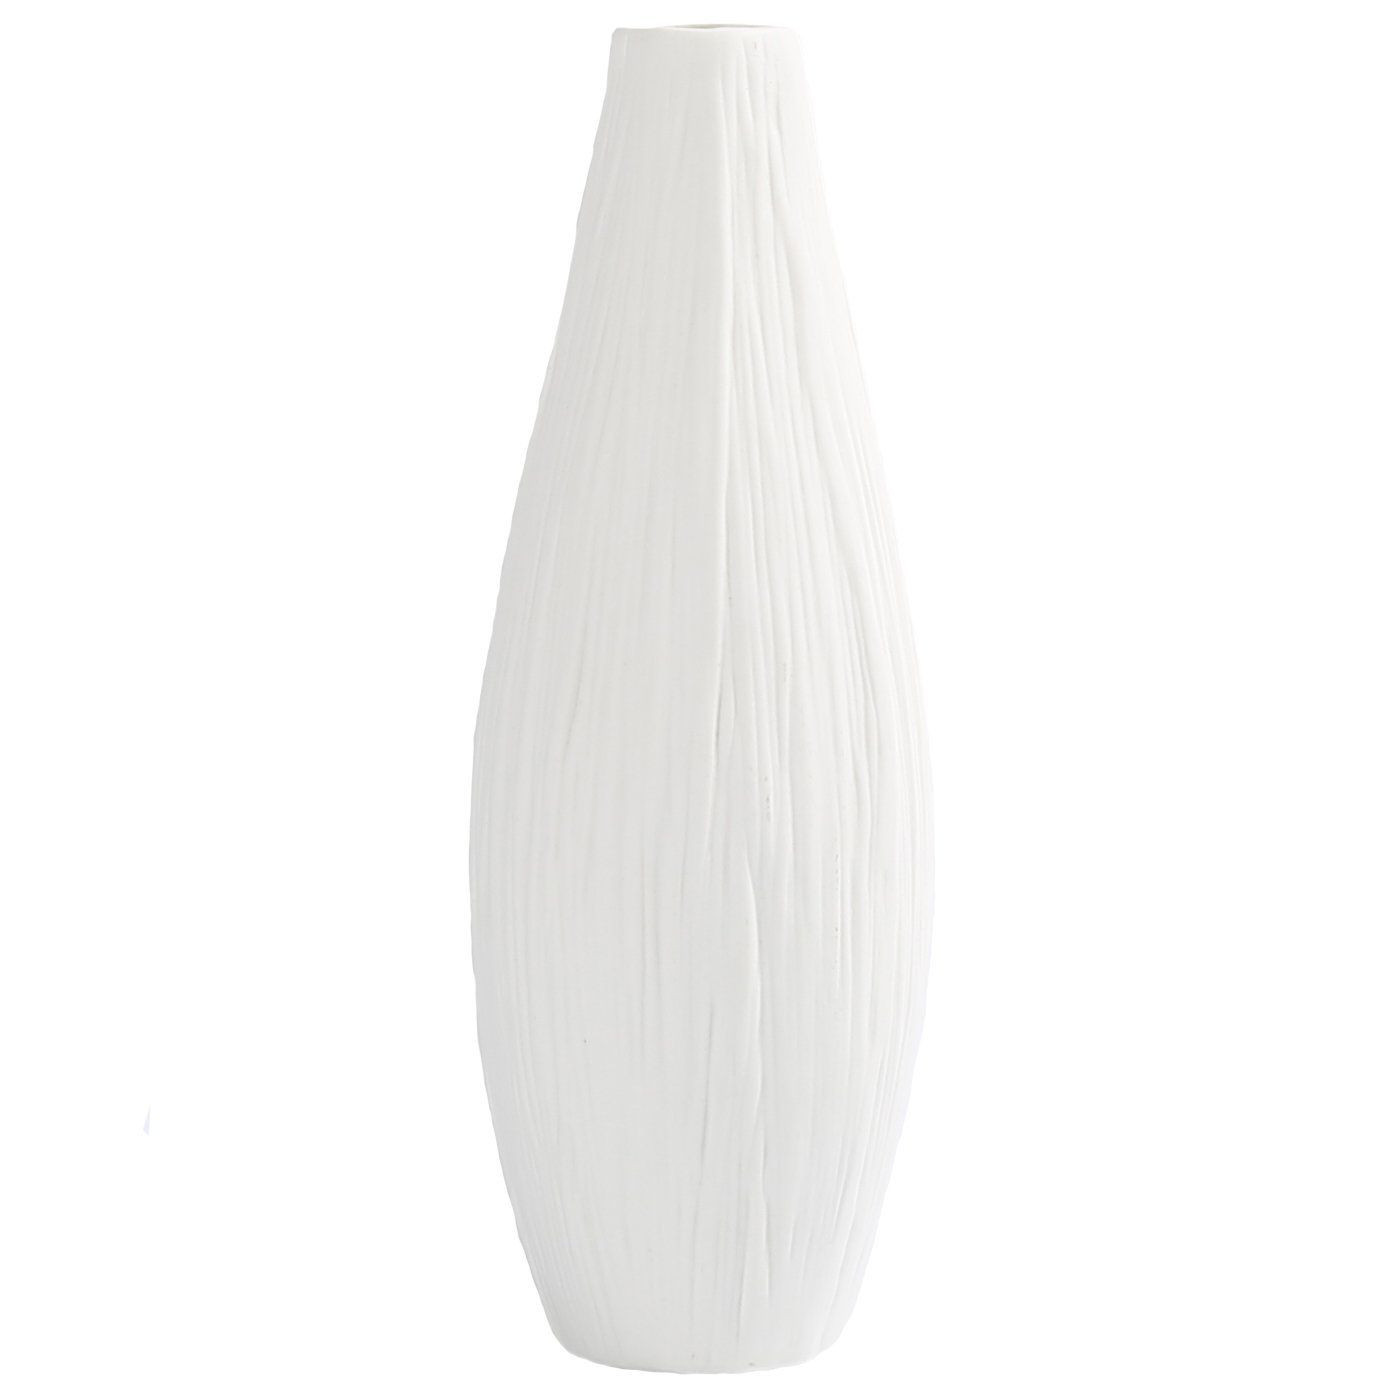 26 Stylish Irish Crystal Vase 2022 free download irish crystal vase of tall black vases pictures il fullxfull h vases black vase white with tall black vases collection d vine dev 10 pure white ceramic flower vase tall oval of